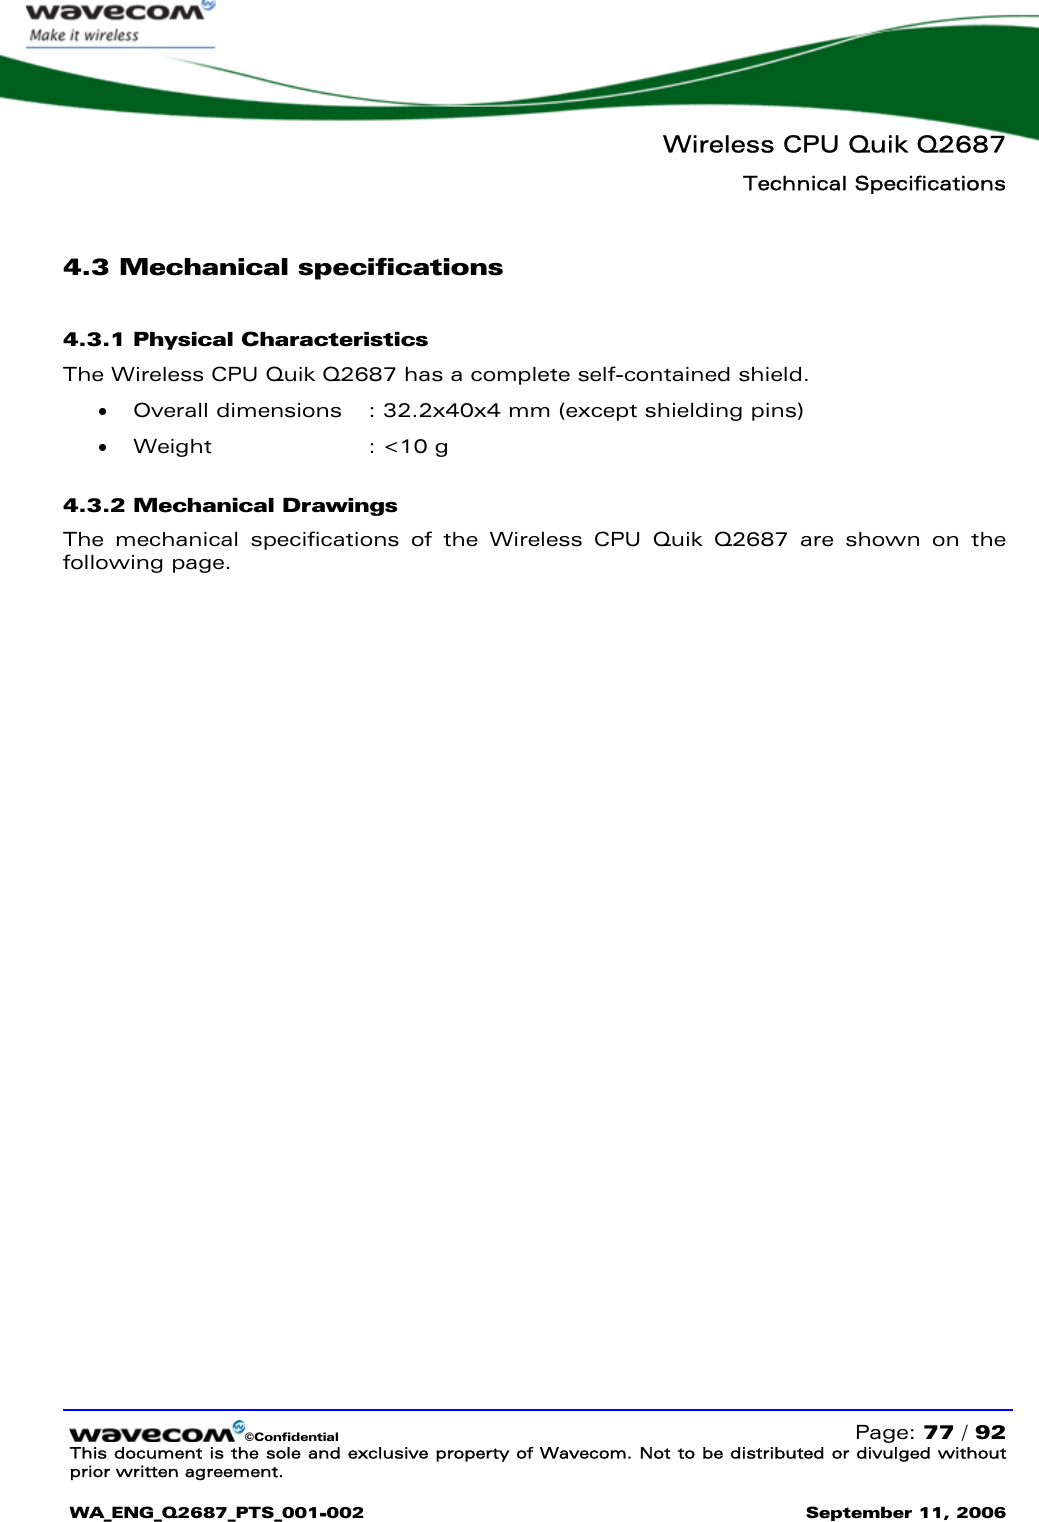   Wireless CPU Quik Q2687 Technical Specifications   ©Confidential   Page: 77 / 92 This document is the sole and exclusive property of Wavecom. Not to be distributed or divulged without prior written agreement.  WA_ENG_Q2687_PTS_001-002 September 11, 2006   4.3 Mechanical specifications 4.3.1 Physical Characteristics The Wireless CPU Quik Q2687 has a complete self-contained shield. • Overall dimensions  : 32.2x40x4 mm (except shielding pins) • Weight  : &lt;10 g 4.3.2 Mechanical Drawings The mechanical specifications of the Wireless CPU Quik Q2687 are shown on the following page.  